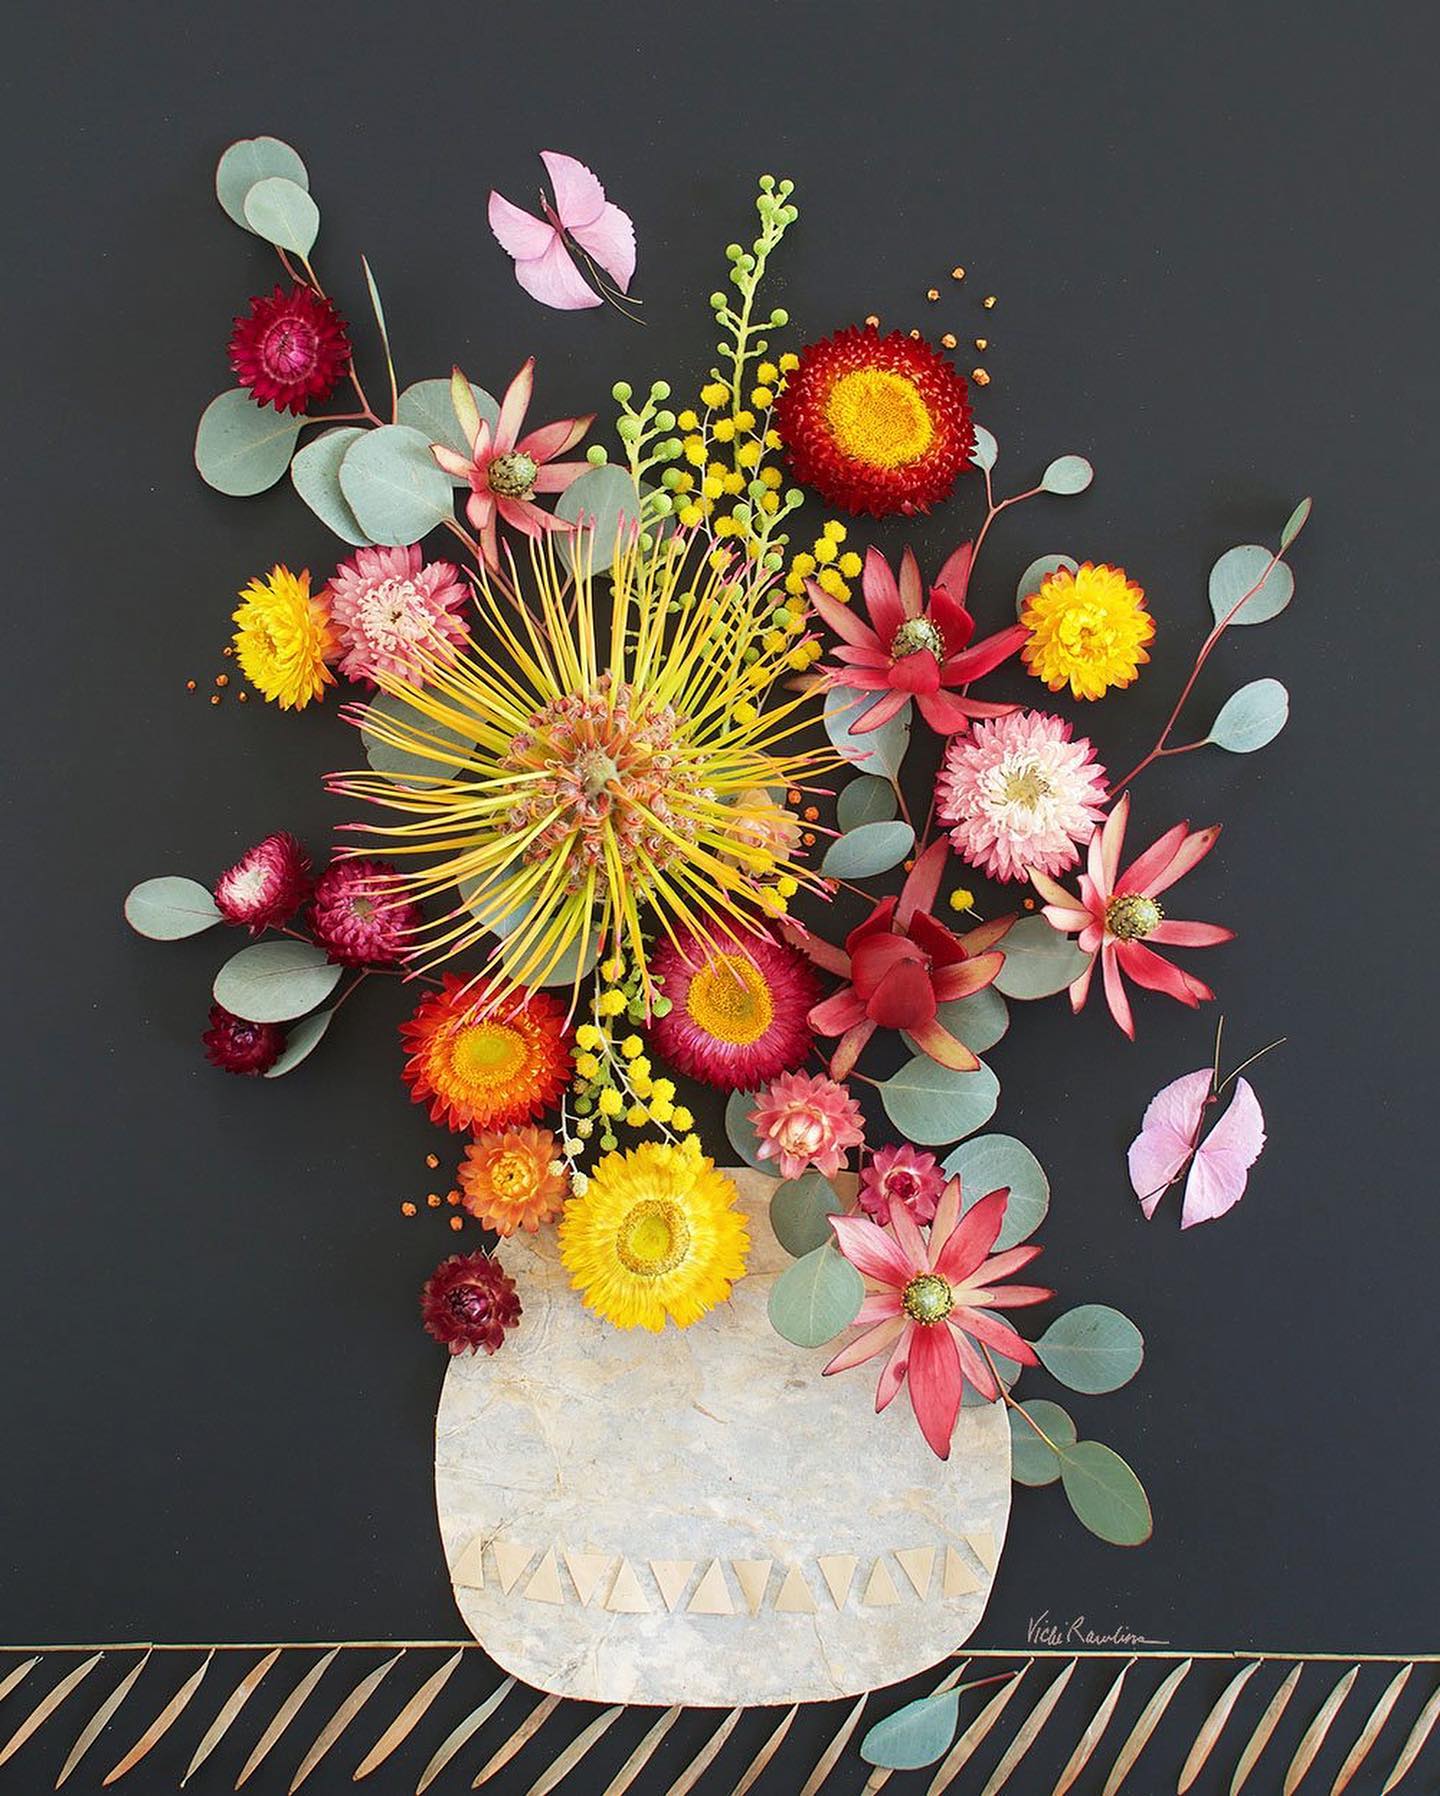 Blossoms and Twigs Are Turned Into Stunning Floral Compositions009